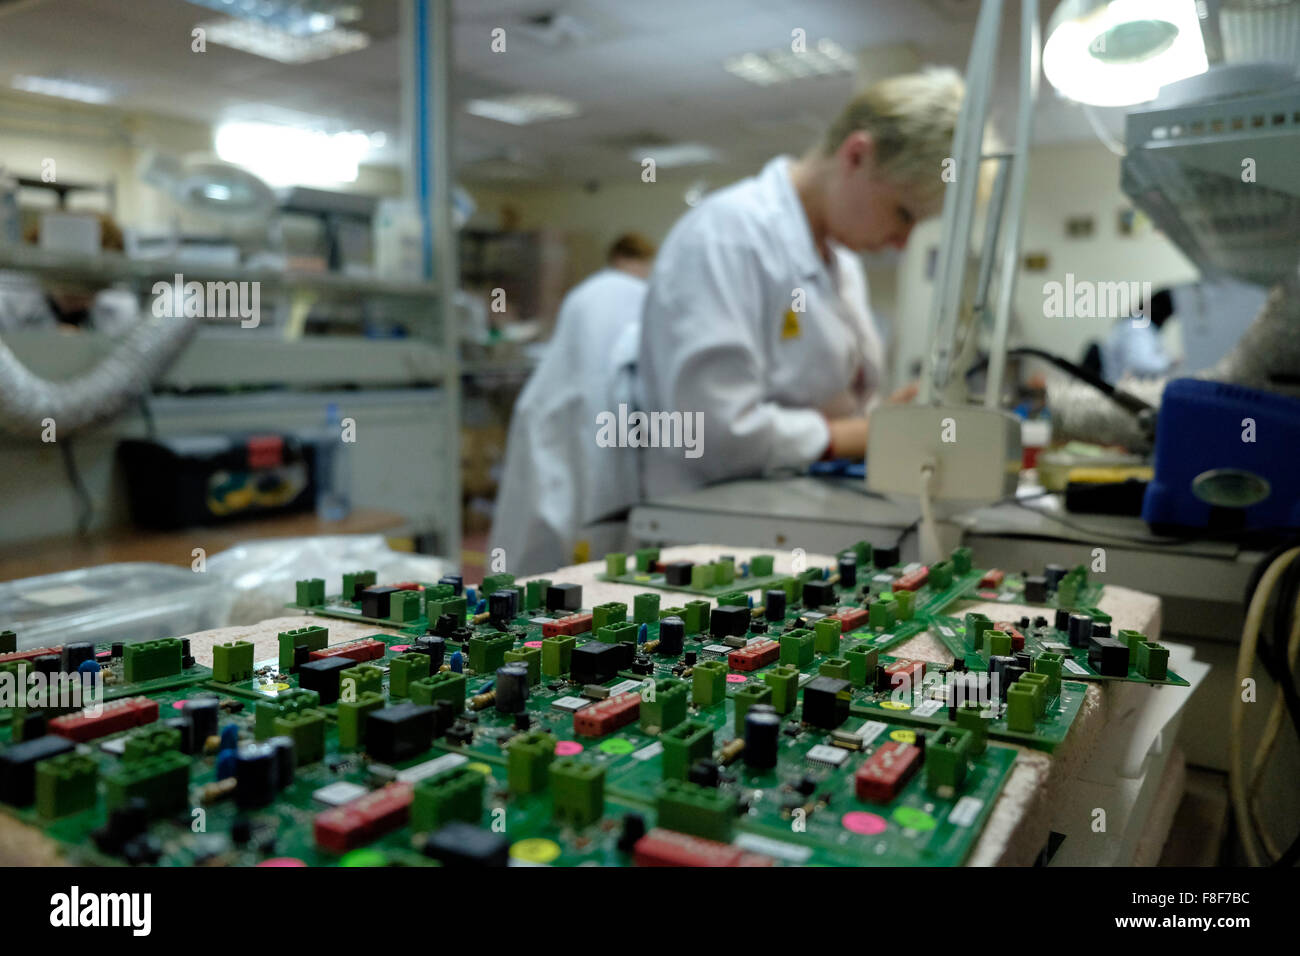 Israel, West Bank. 9th December, 2015. A Russian Jewish immigrant employee from Ariel working at Rolbit factory an Israeli owned factory which produces electronic goods in Barkan Industrial Park situated in Samaria, next to the Jewish settlement Barkan in the West Bank, Israel on 09 December 2015. The European Union’s executive laid out recently guidelines for labeling products from Israeli settlements in occupied Palestinian territories. Israel stressed that sanctions against this industry pose a threat to the mutual financial cooperation in the region. Stock Photo